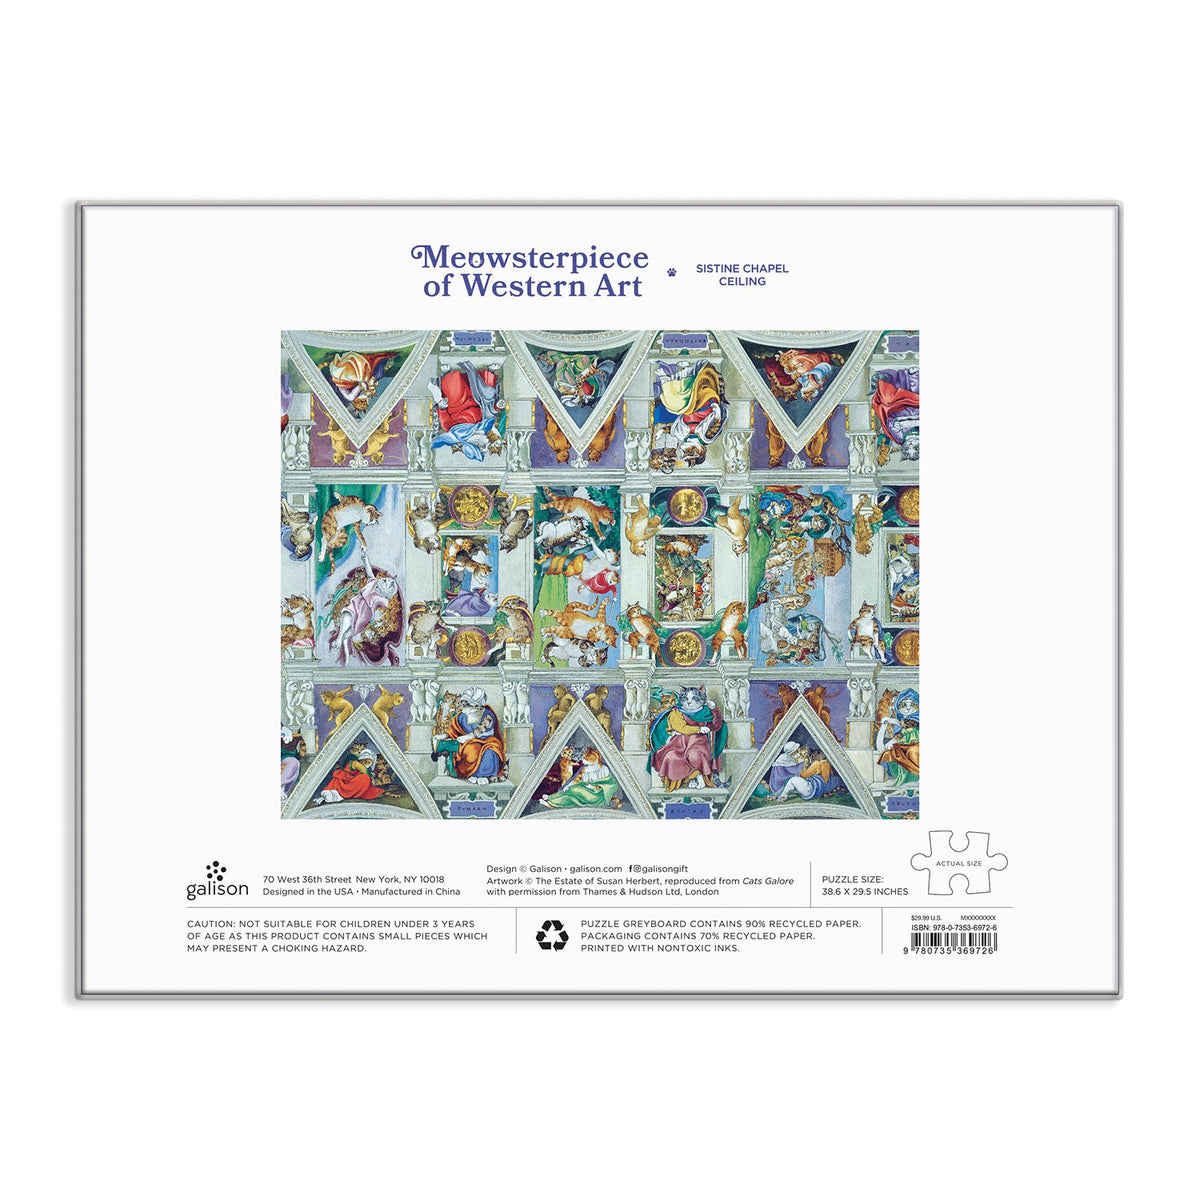 Sistine Chapel Ceiling Meowsterpiece of Western Art 2000 Piece Jigsaw Puzzle